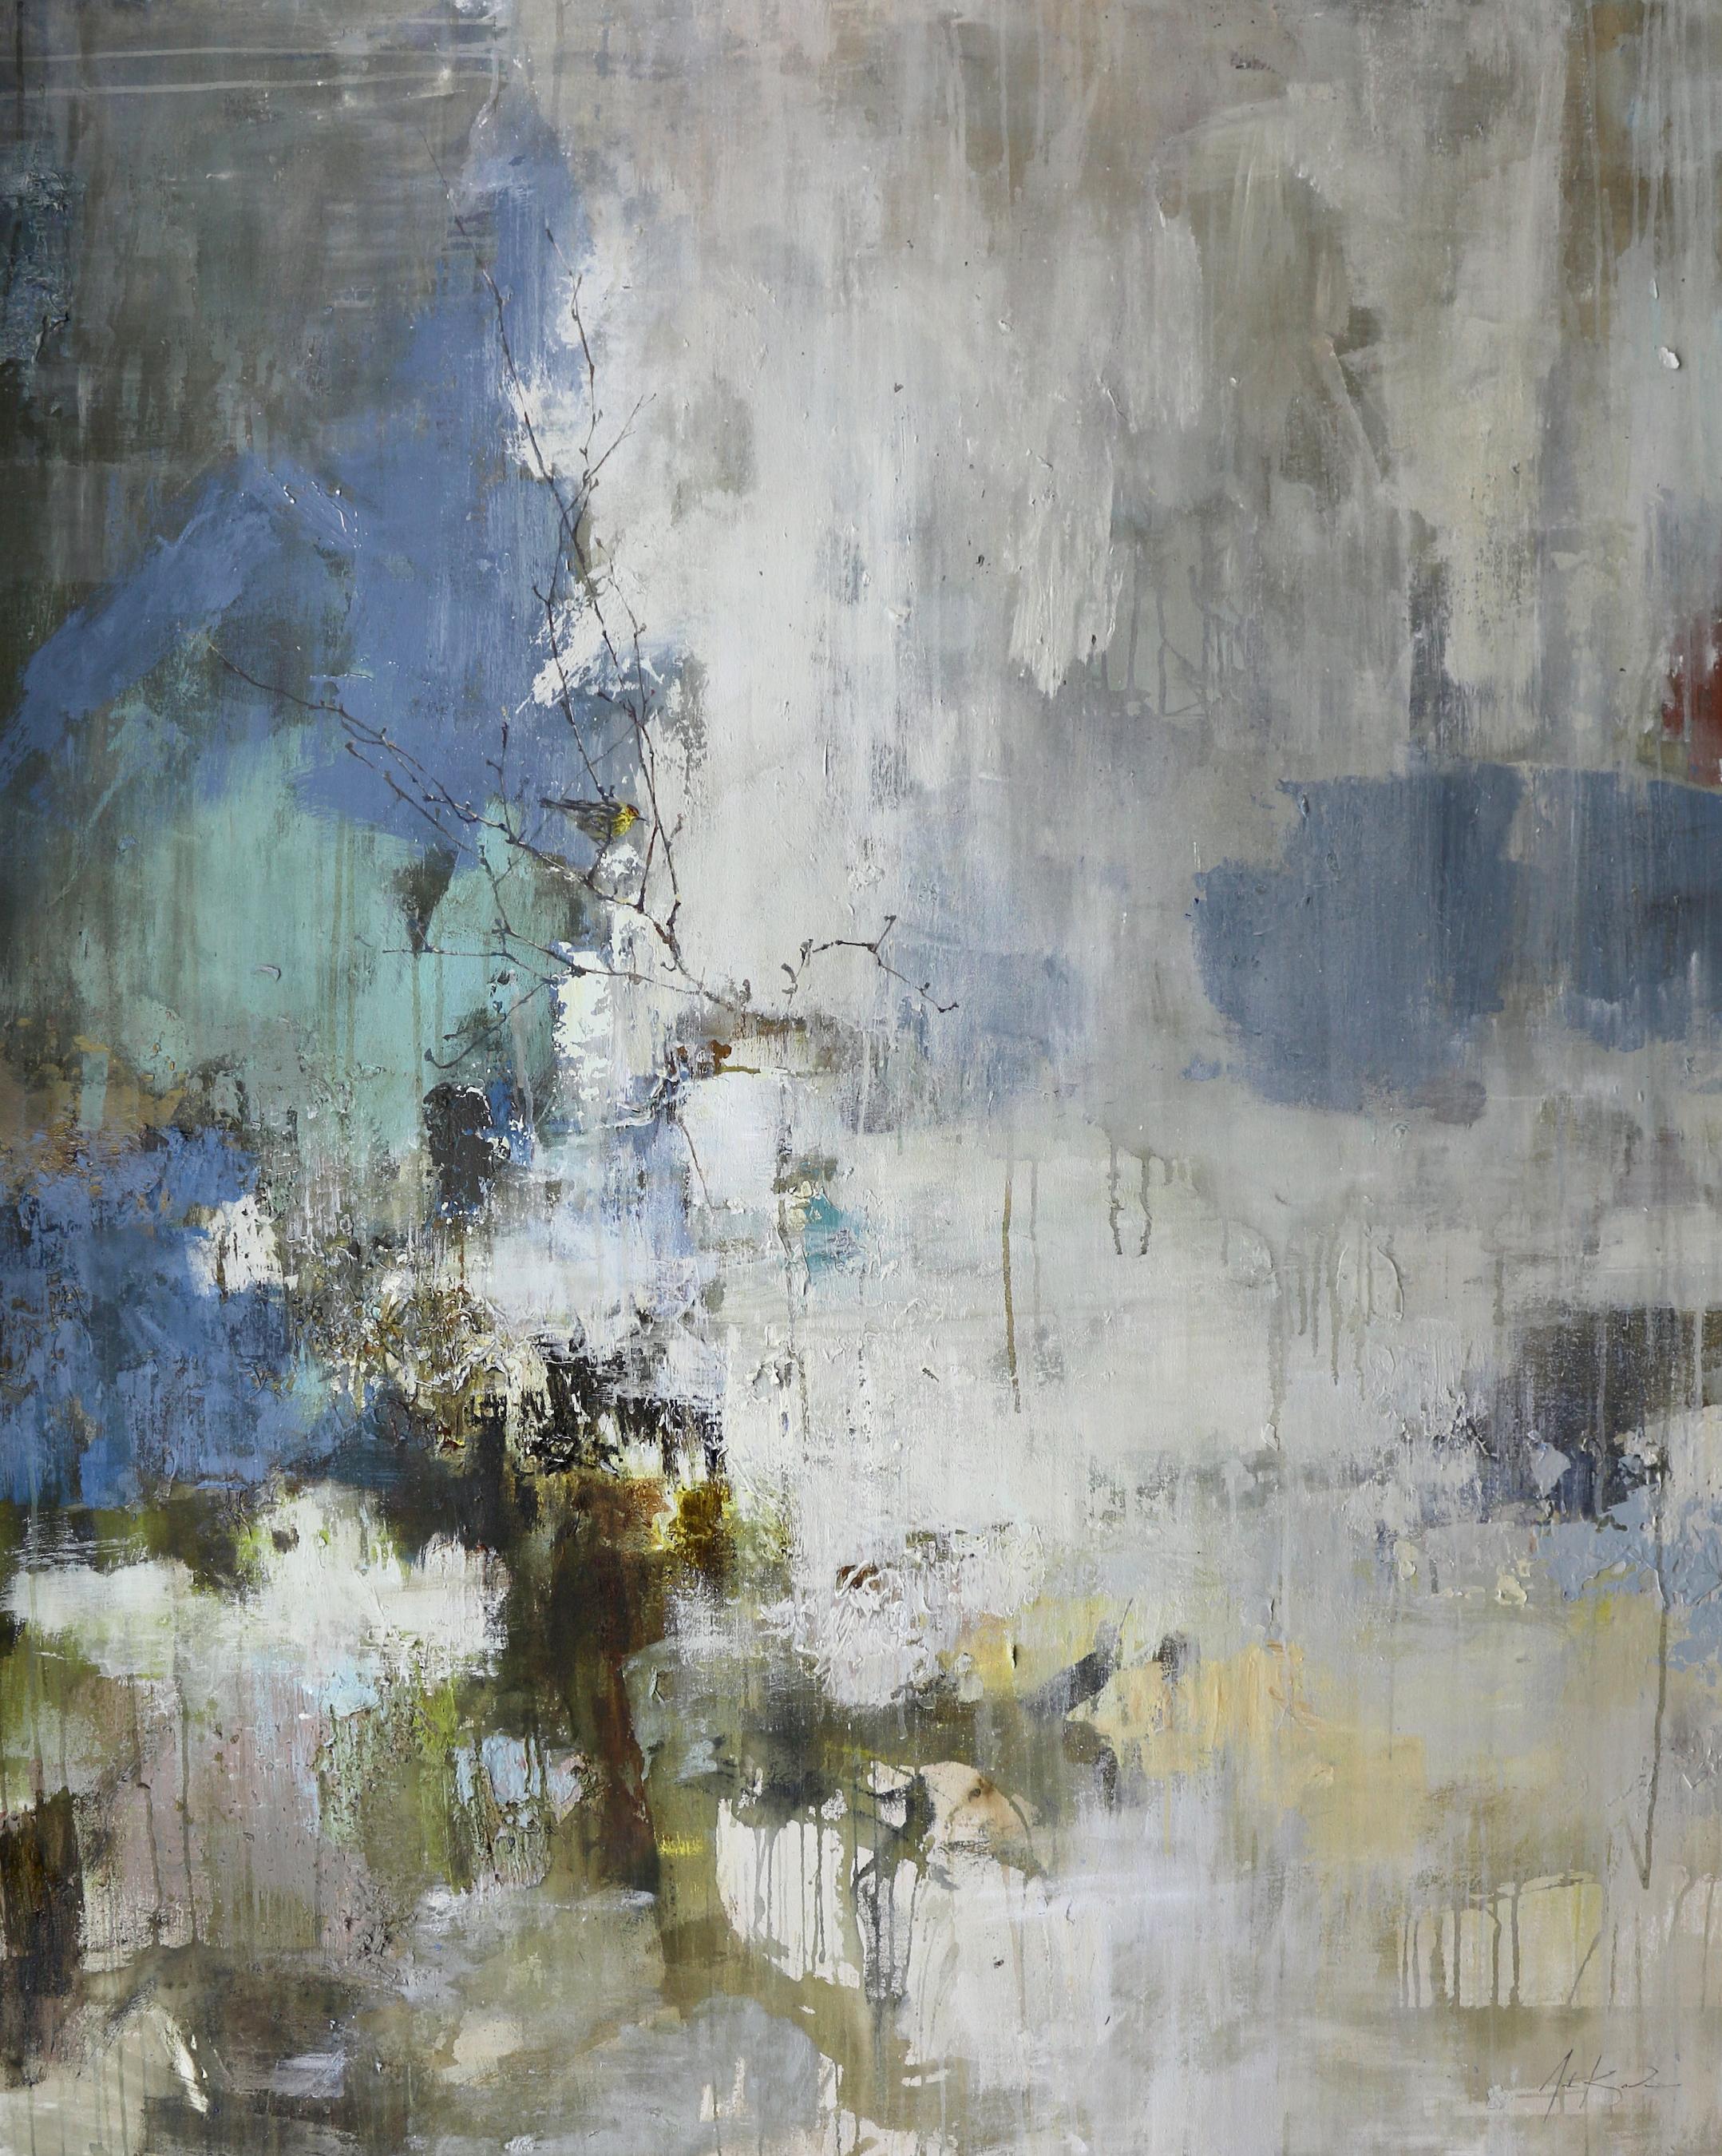 'Impending Rain, A Welcome Idea(Cape-may Warbler)' is a large vertical mixed media on canvas abstract painting created by American artist Justin Kellner in 2020. Featuring a palette made of blue, beige, grey, and green, the painting presents an